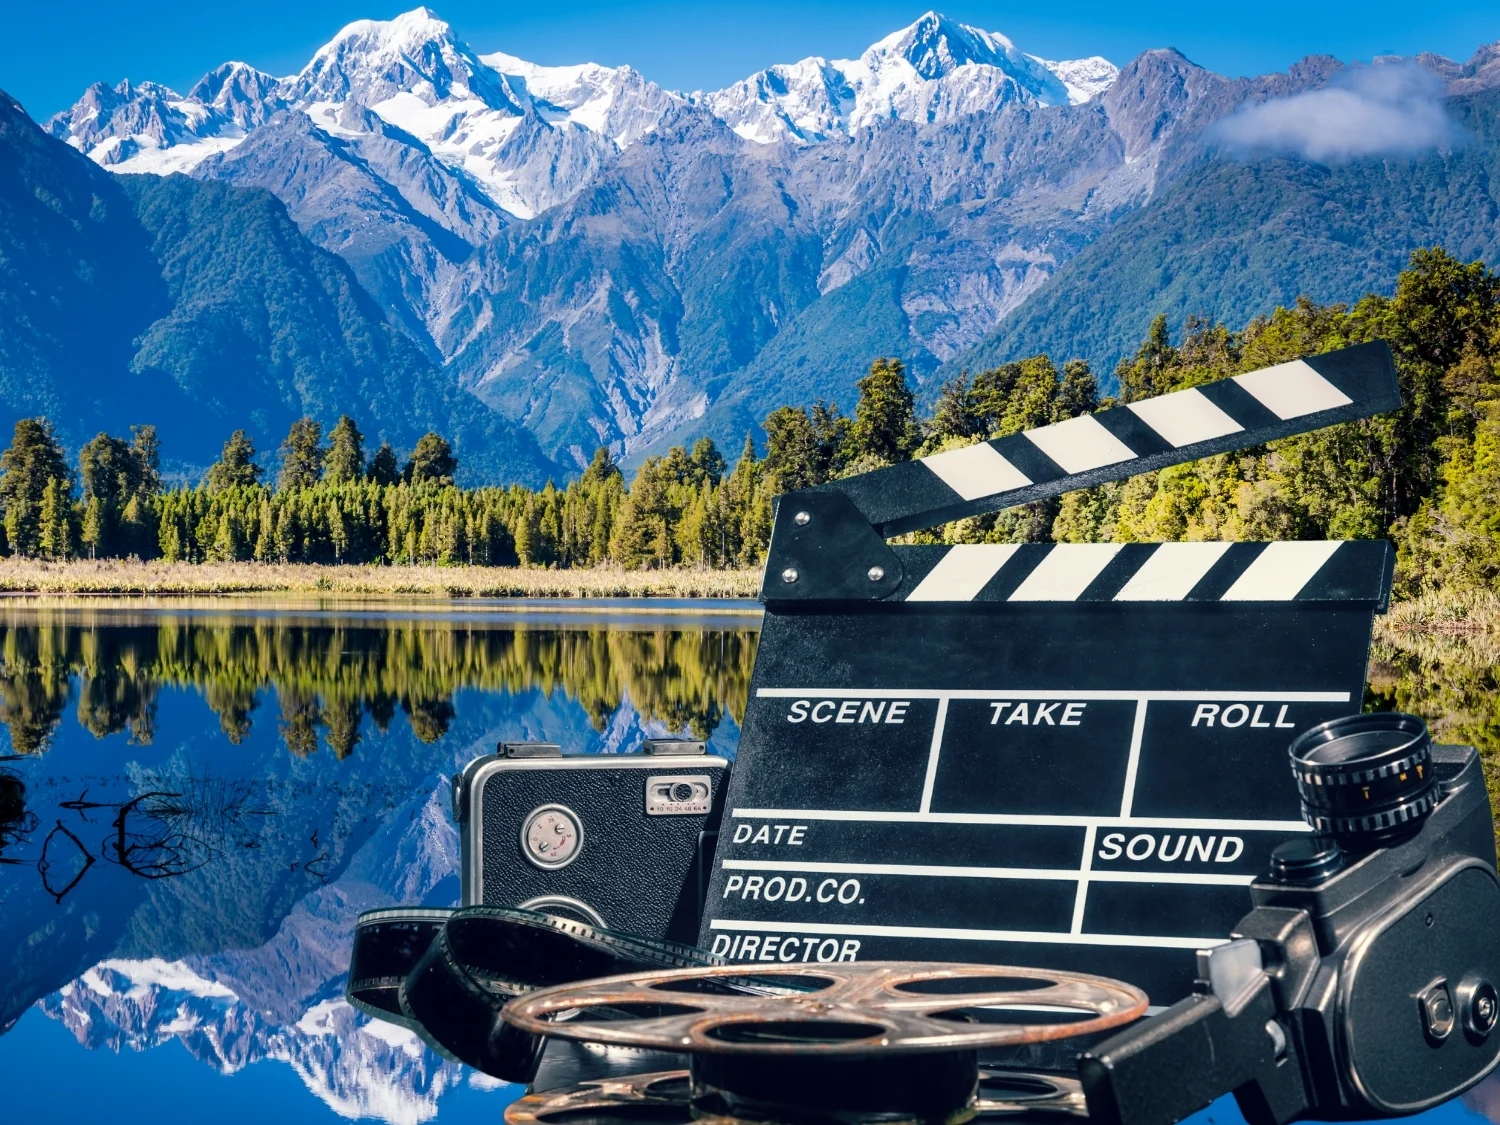 10 Extraordinary Movies Shot In New Zealand That Will Inspire You To Visit!